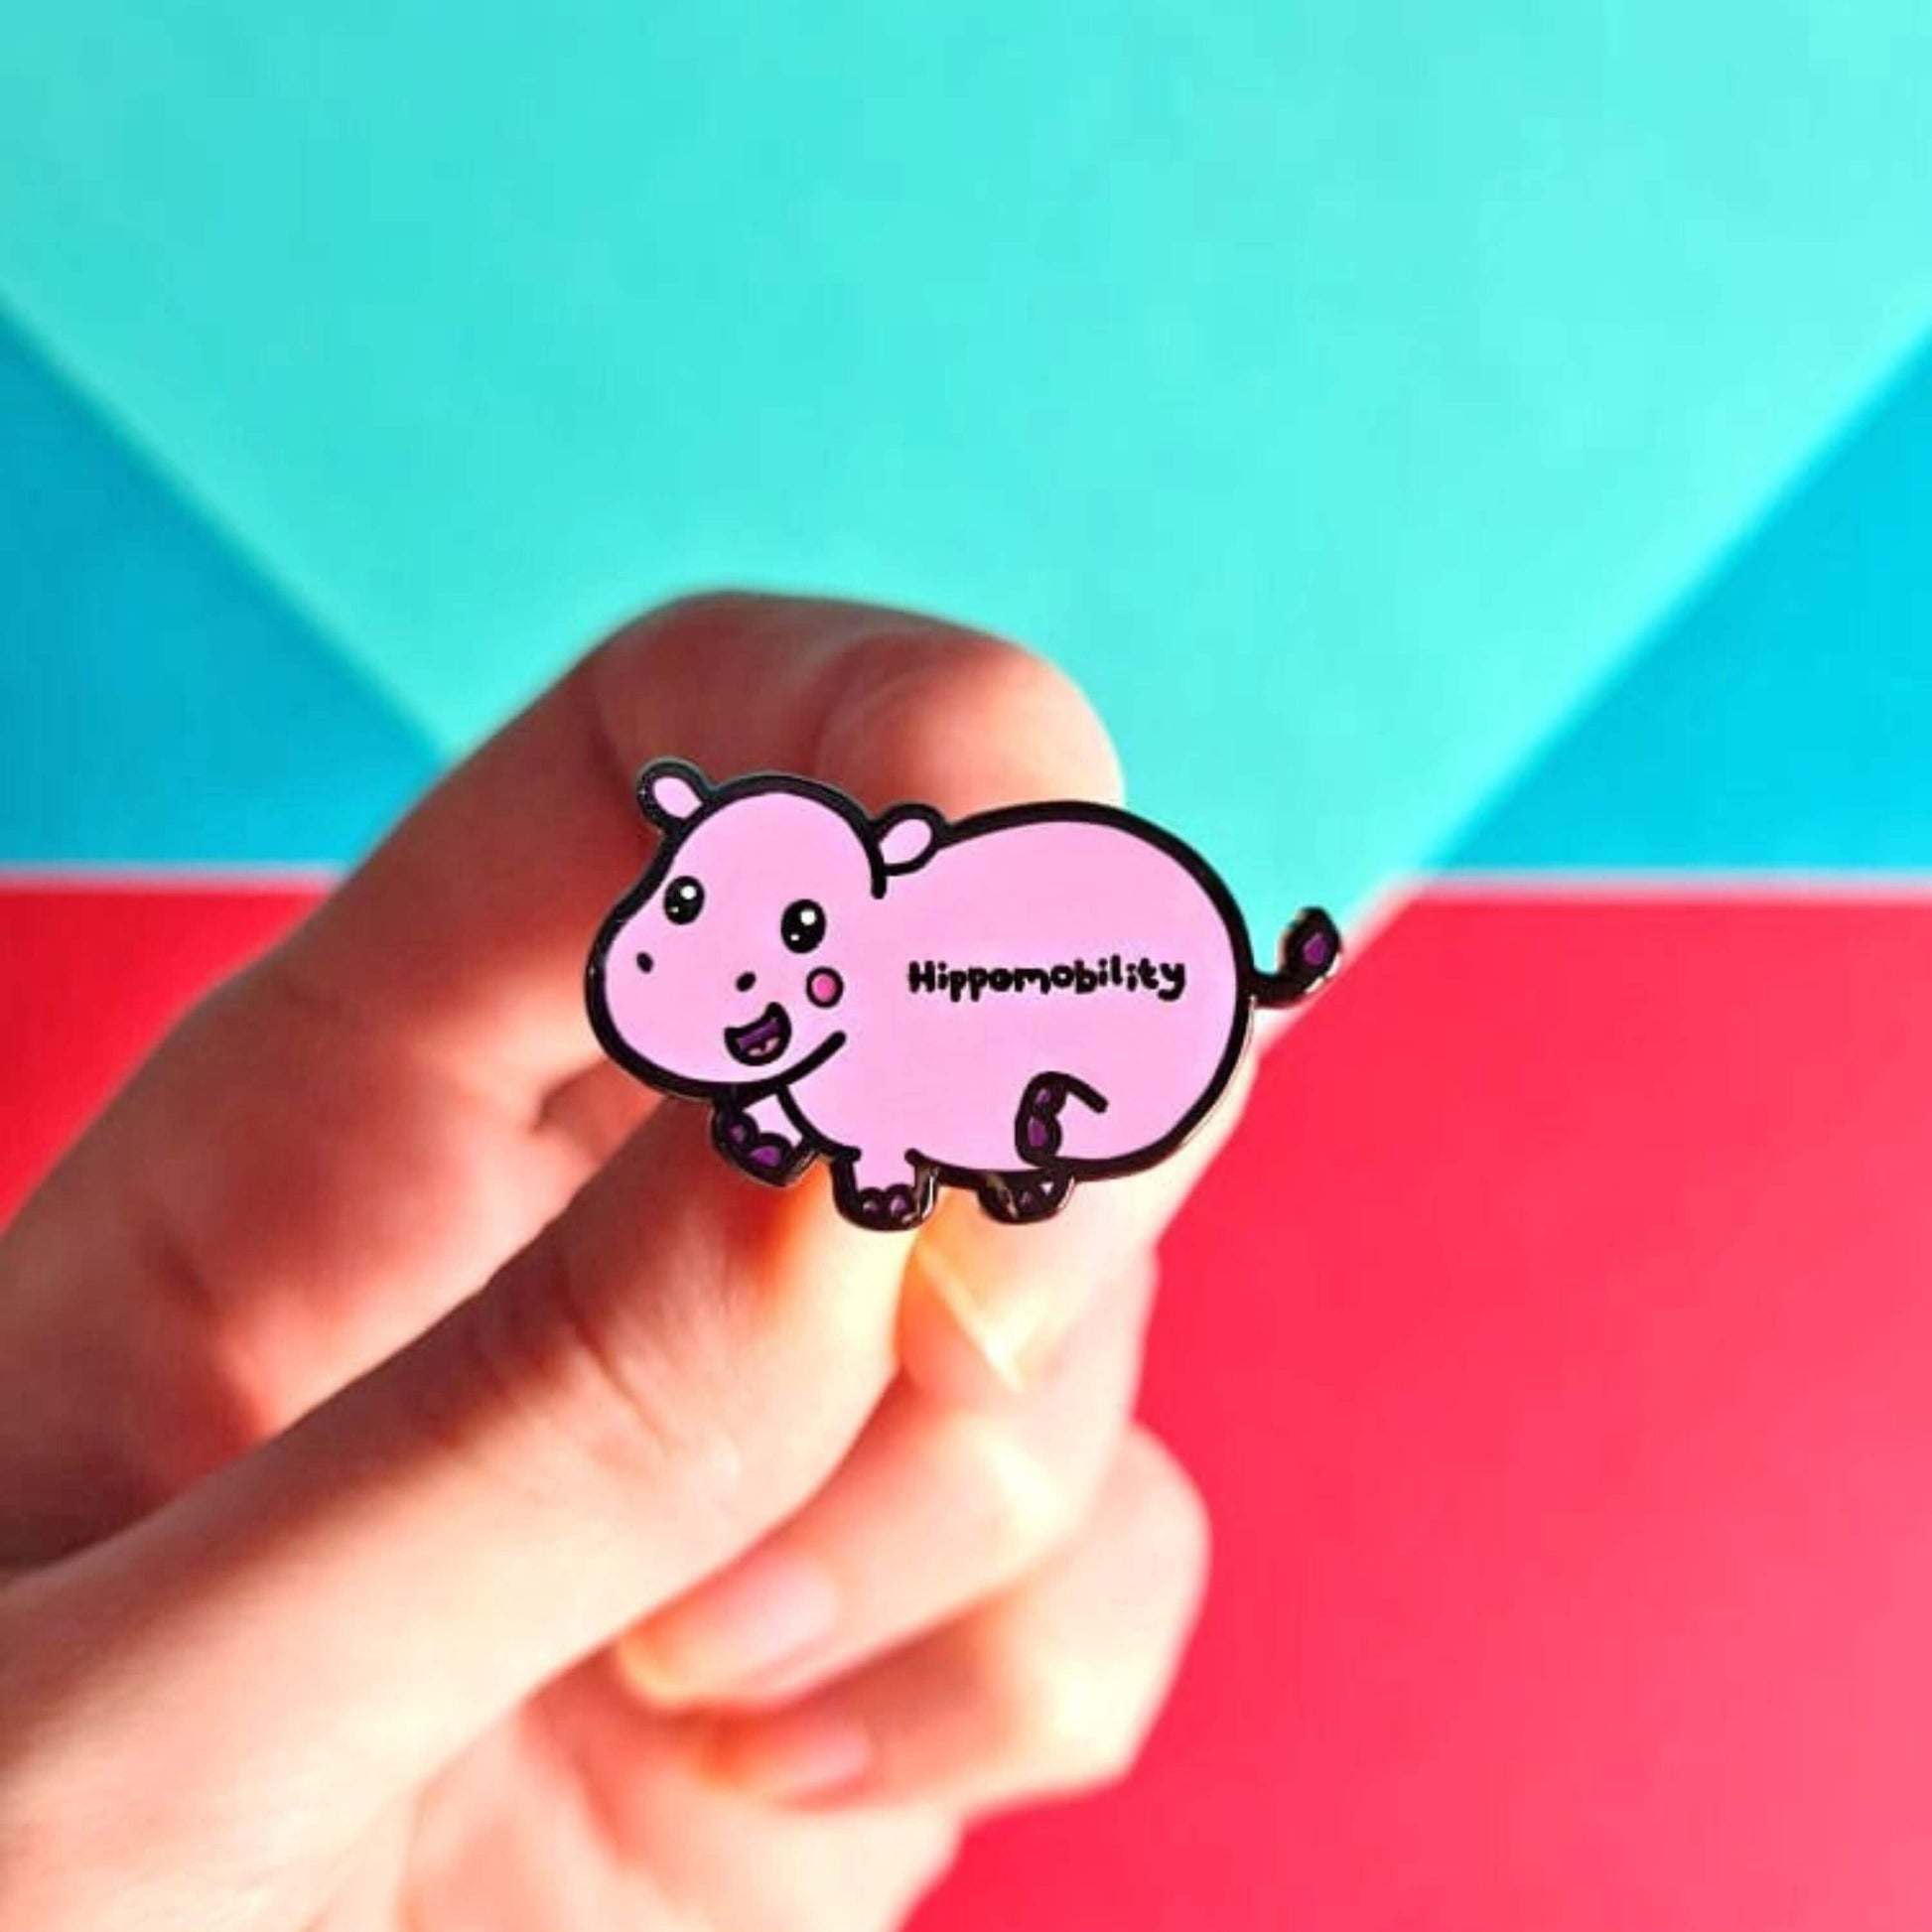 Hippmobility Enamel Pin - Hyper Mobility being held in front of a red and blue background. The enamel pin is of a pink happy hippo with the text hippomobility written on its stomach. The enamel pin is designed to raise awareness for hyper mobility